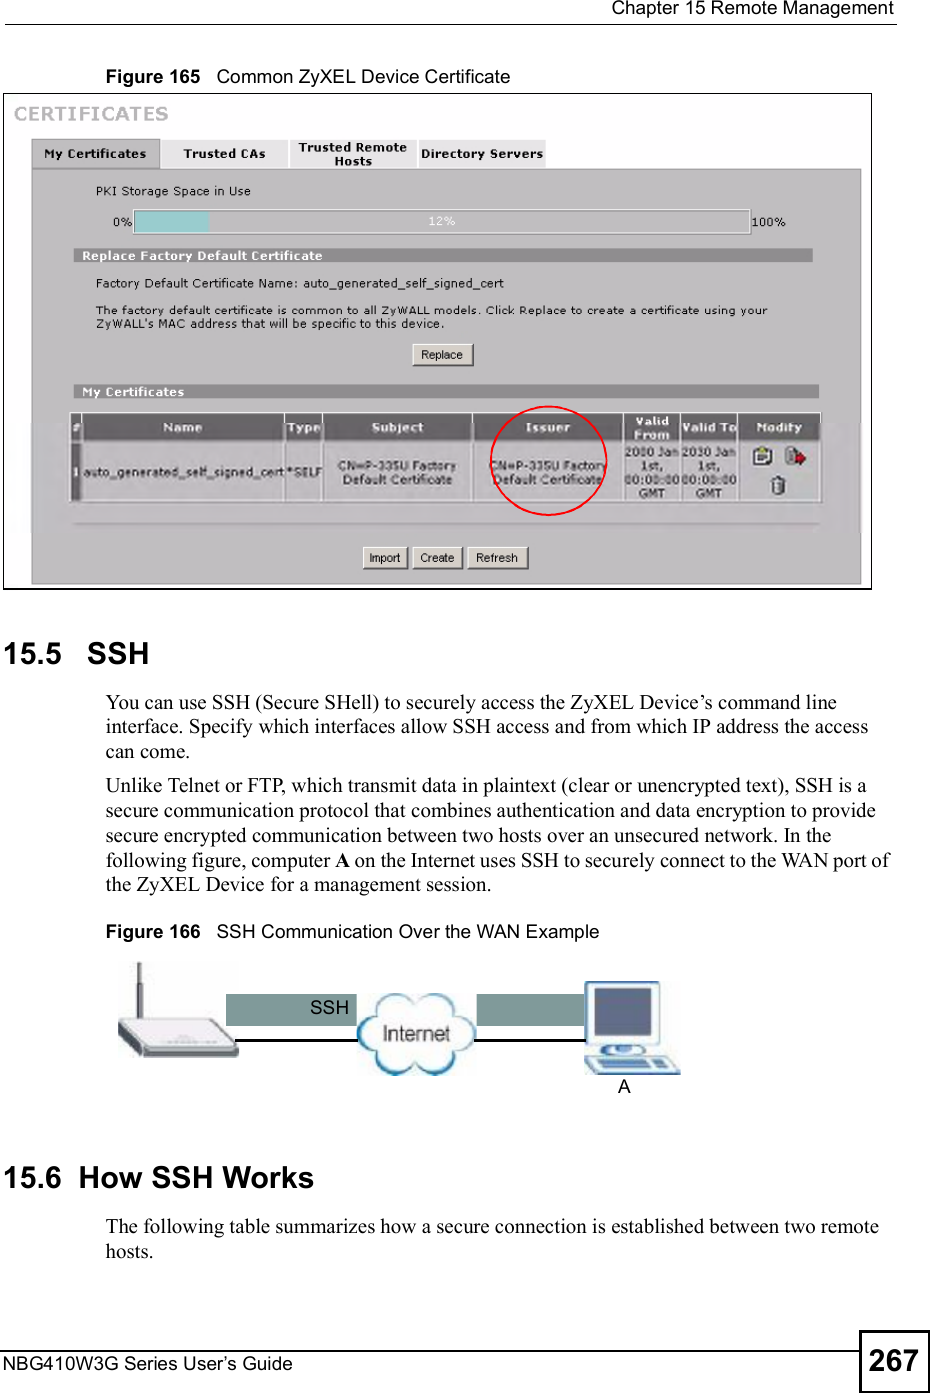  Chapter 15Remote ManagementNBG410W3G Series User s Guide 267Figure 165   Common ZyXEL Device Certificate15.5   SSH You can use SSH (Secure SHell) to securely access the ZyXEL Device!s command line interface. Specify which interfaces allow SSH access and from which IP address the access can come. Unlike Telnet or FTP, which transmit data in plaintext (clear or unencrypted text), SSH is a secure communication protocol that combines authentication and data encryption to provide secure encrypted communication between two hosts over an unsecured network. In the following figure, computer A on the Internet uses SSH to securely connect to the WAN port of the ZyXEL Device for a management session.Figure 166   SSH Communication Over the WAN Example 15.6  How SSH Works The following table summarizes how a secure connection is established between two remote hosts. SSHA